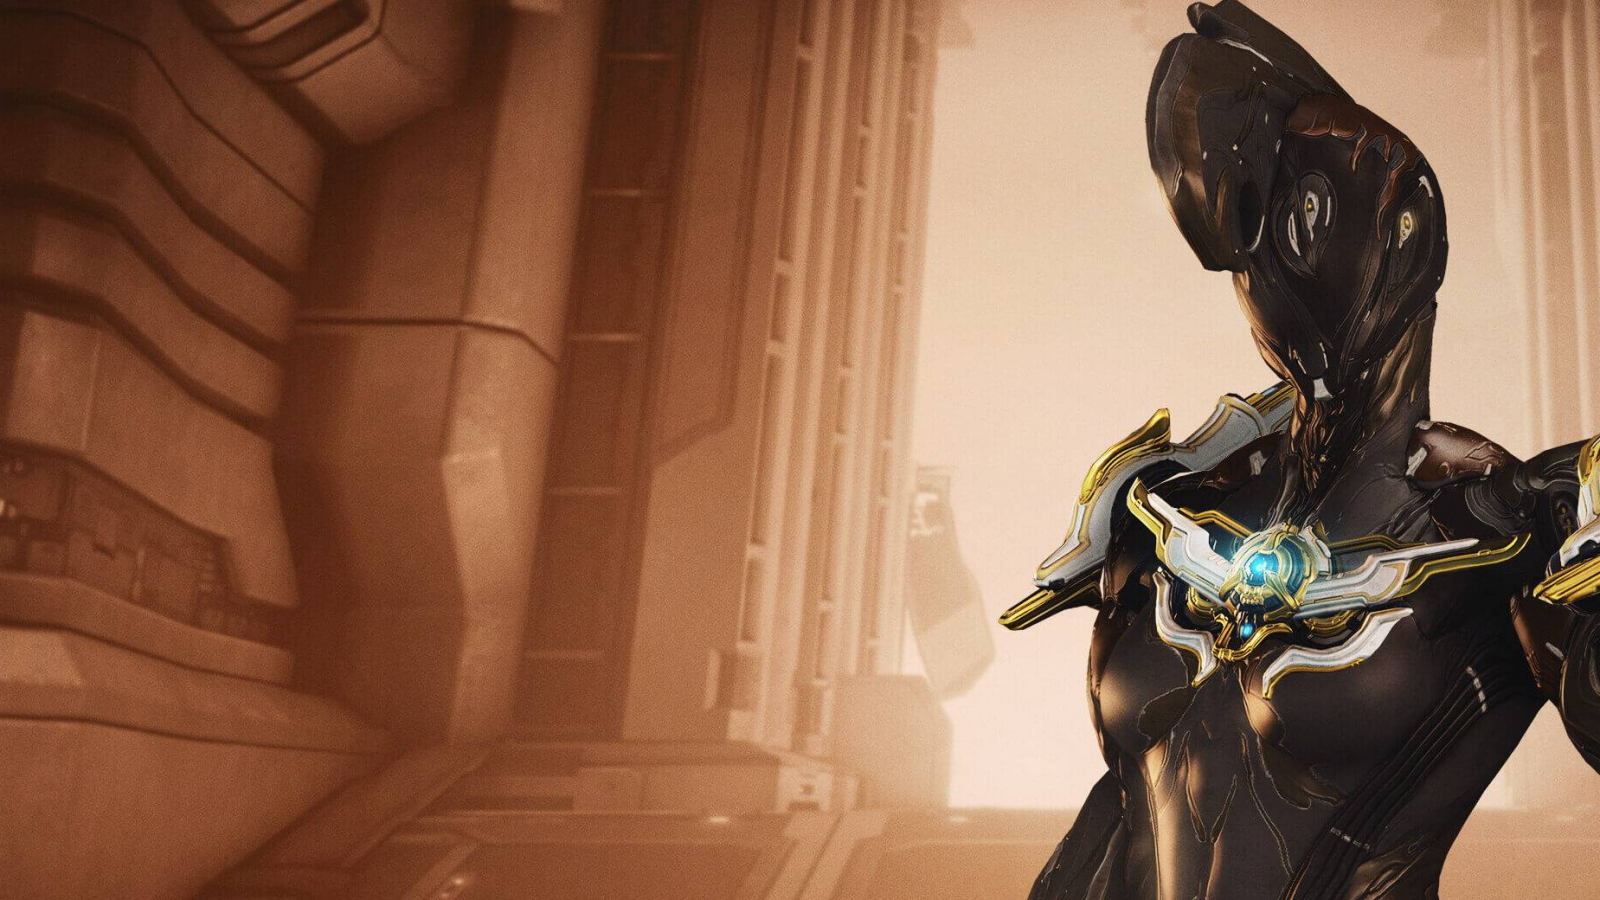 Get the Avia Prime Armor Set with Twitch Prime